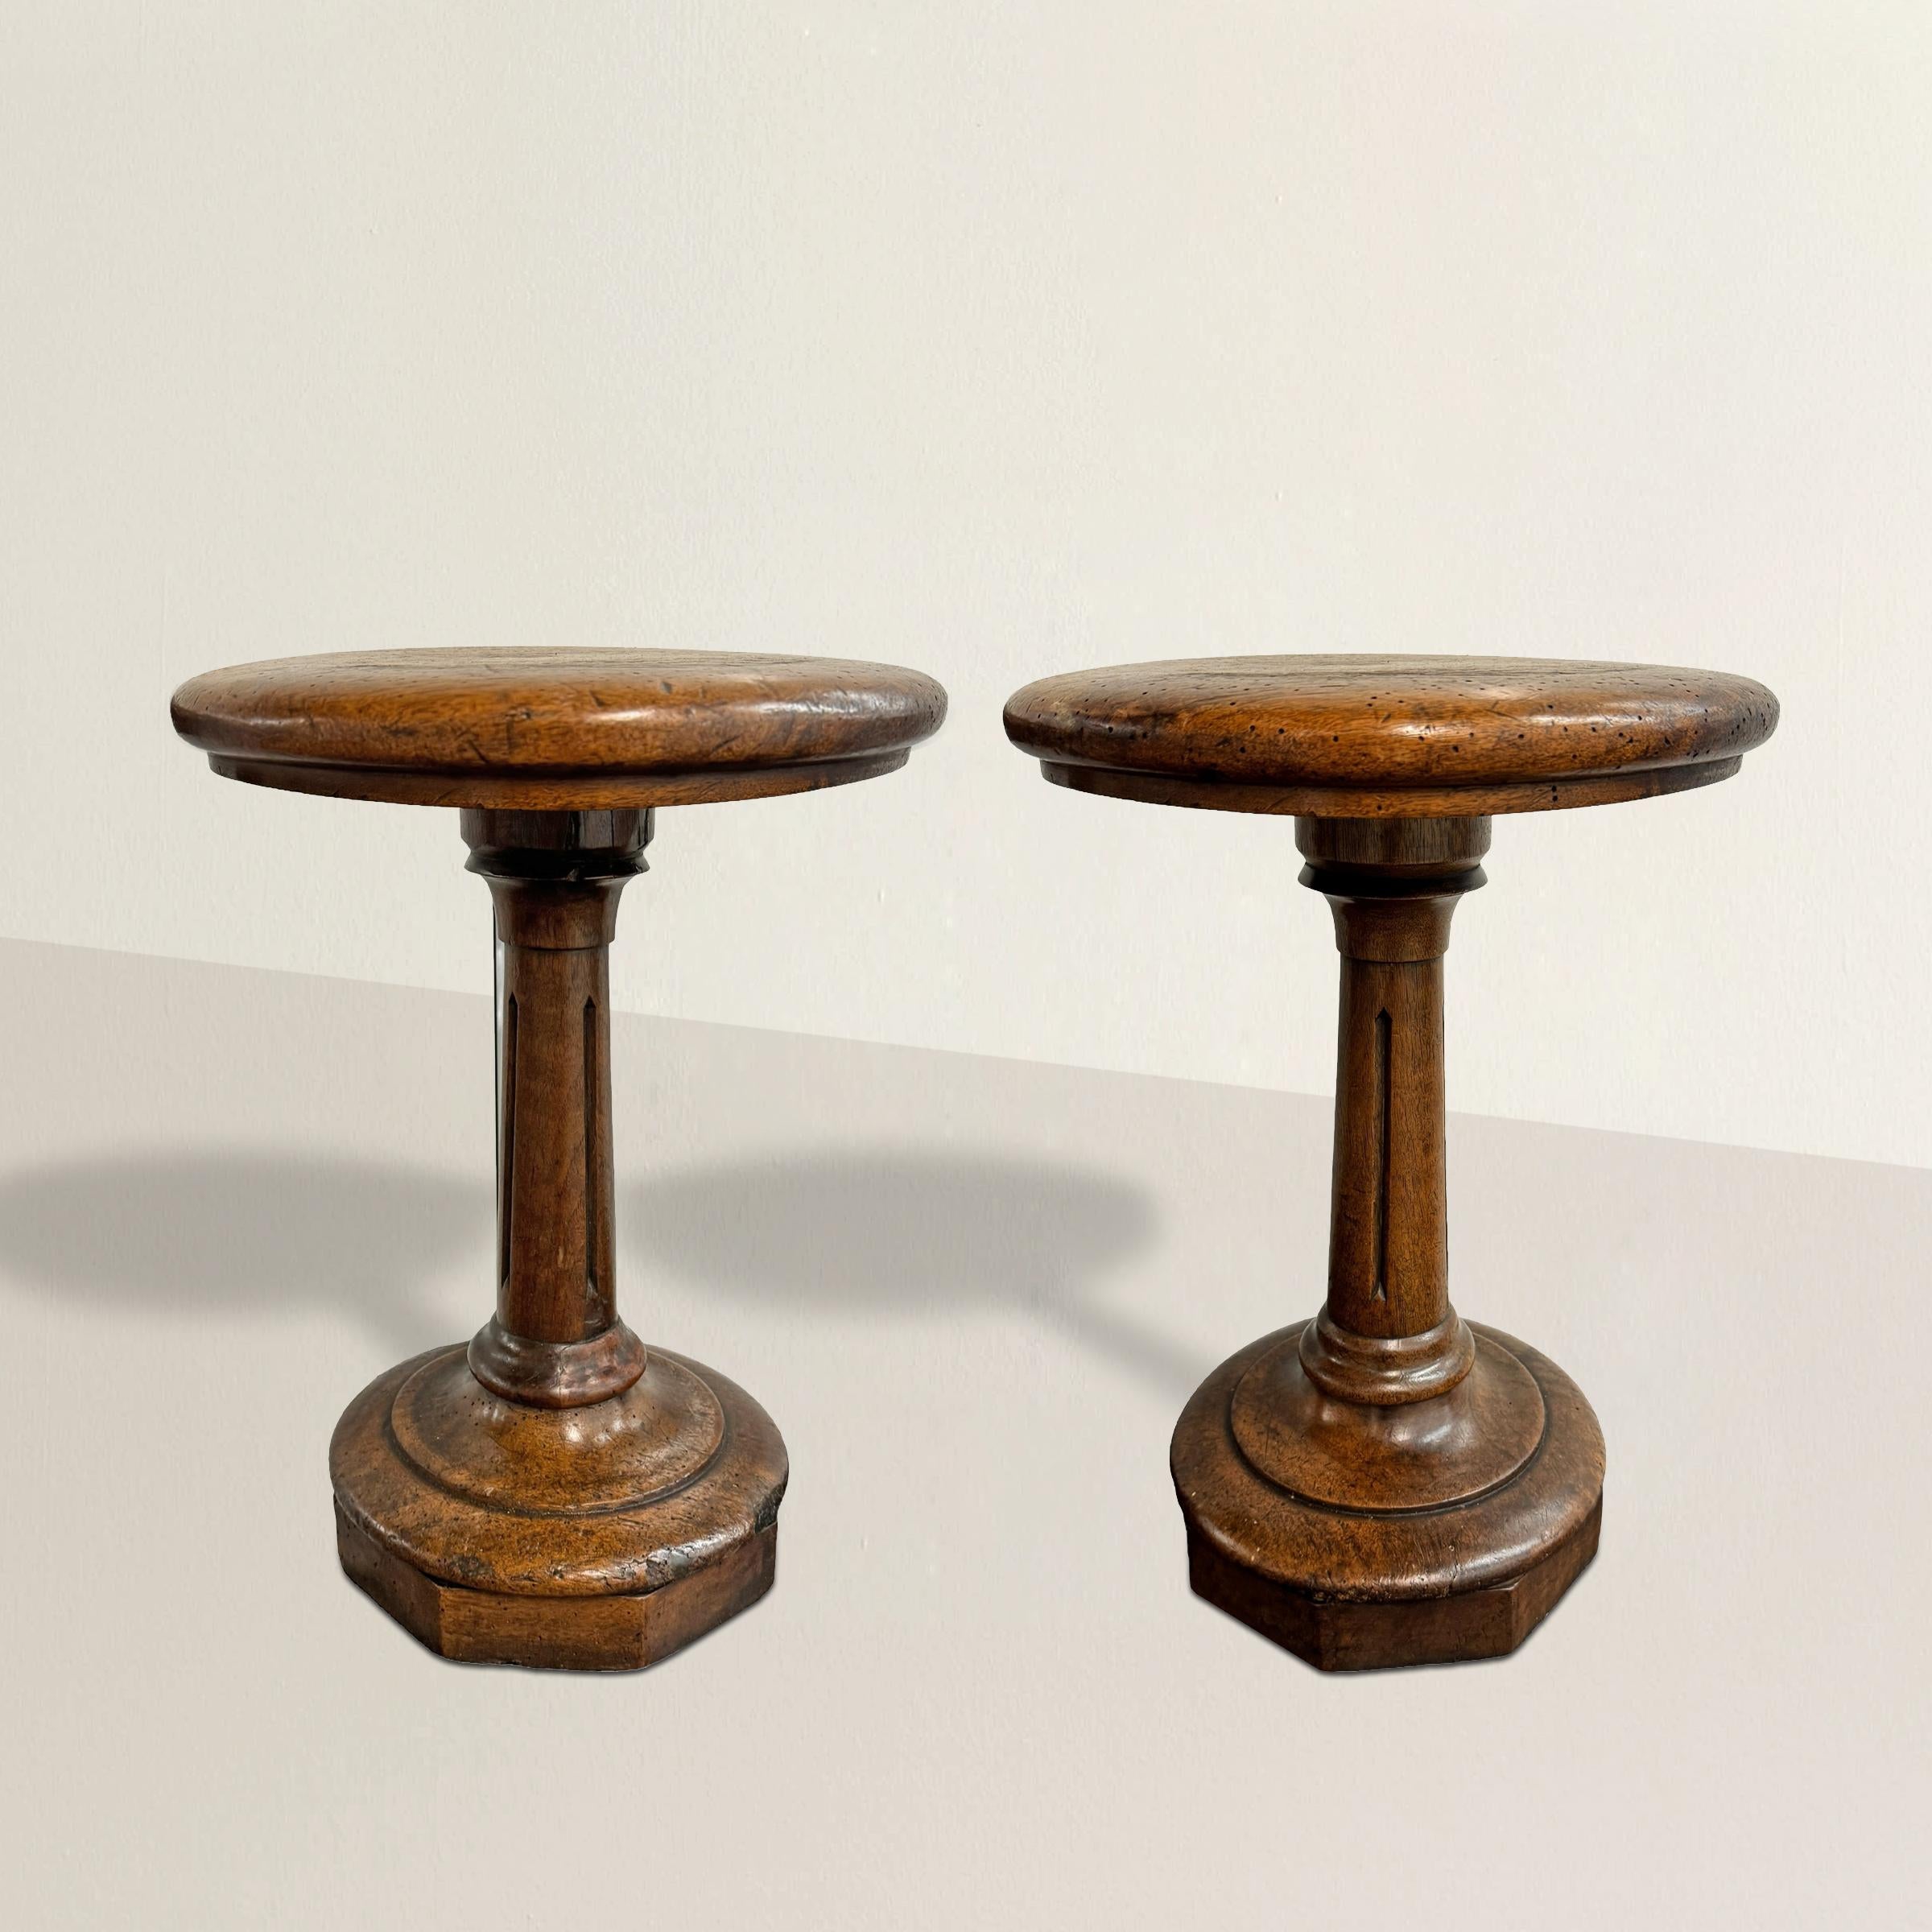 Crafted with care and boasting a rich history, these 19th century English pub stools feature well-worn round seats that whisper tales of convivial gatherings. They're supported by stylized fluted columns adorned with delicately carved arrow details,